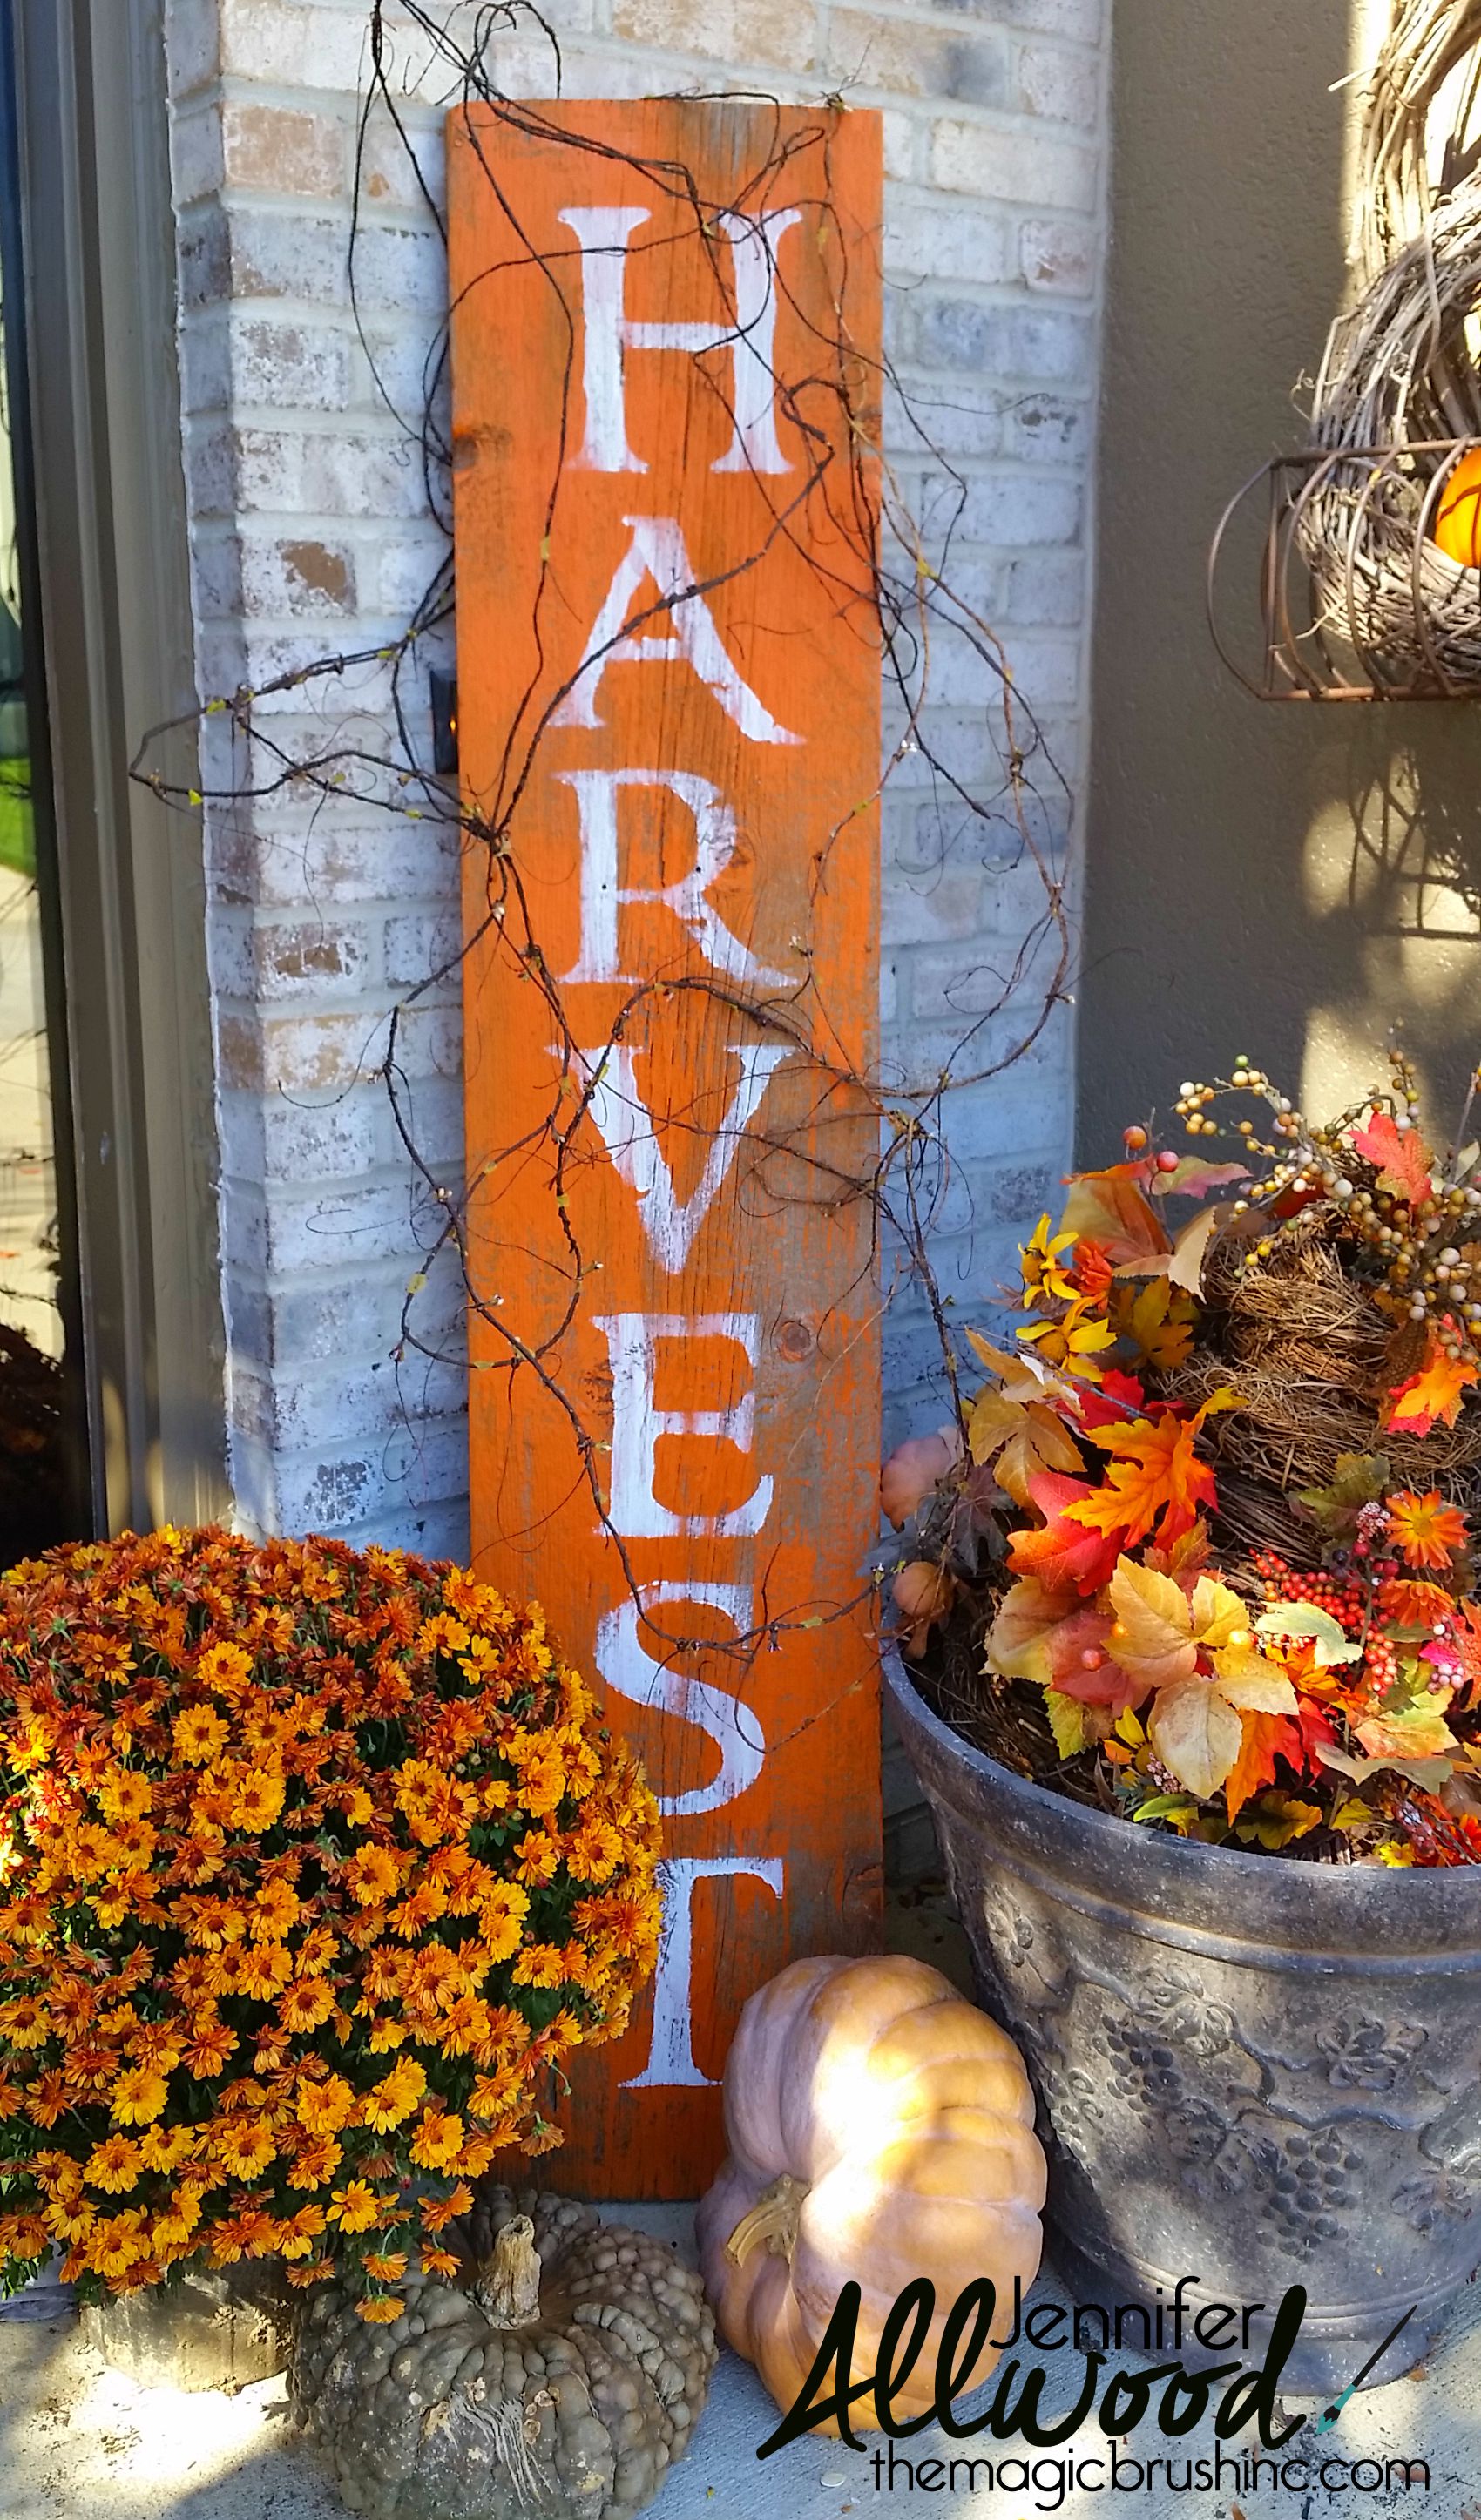 HARVEST Barnwood sign for fall – my pin that is going VIRAL on Pinterest!